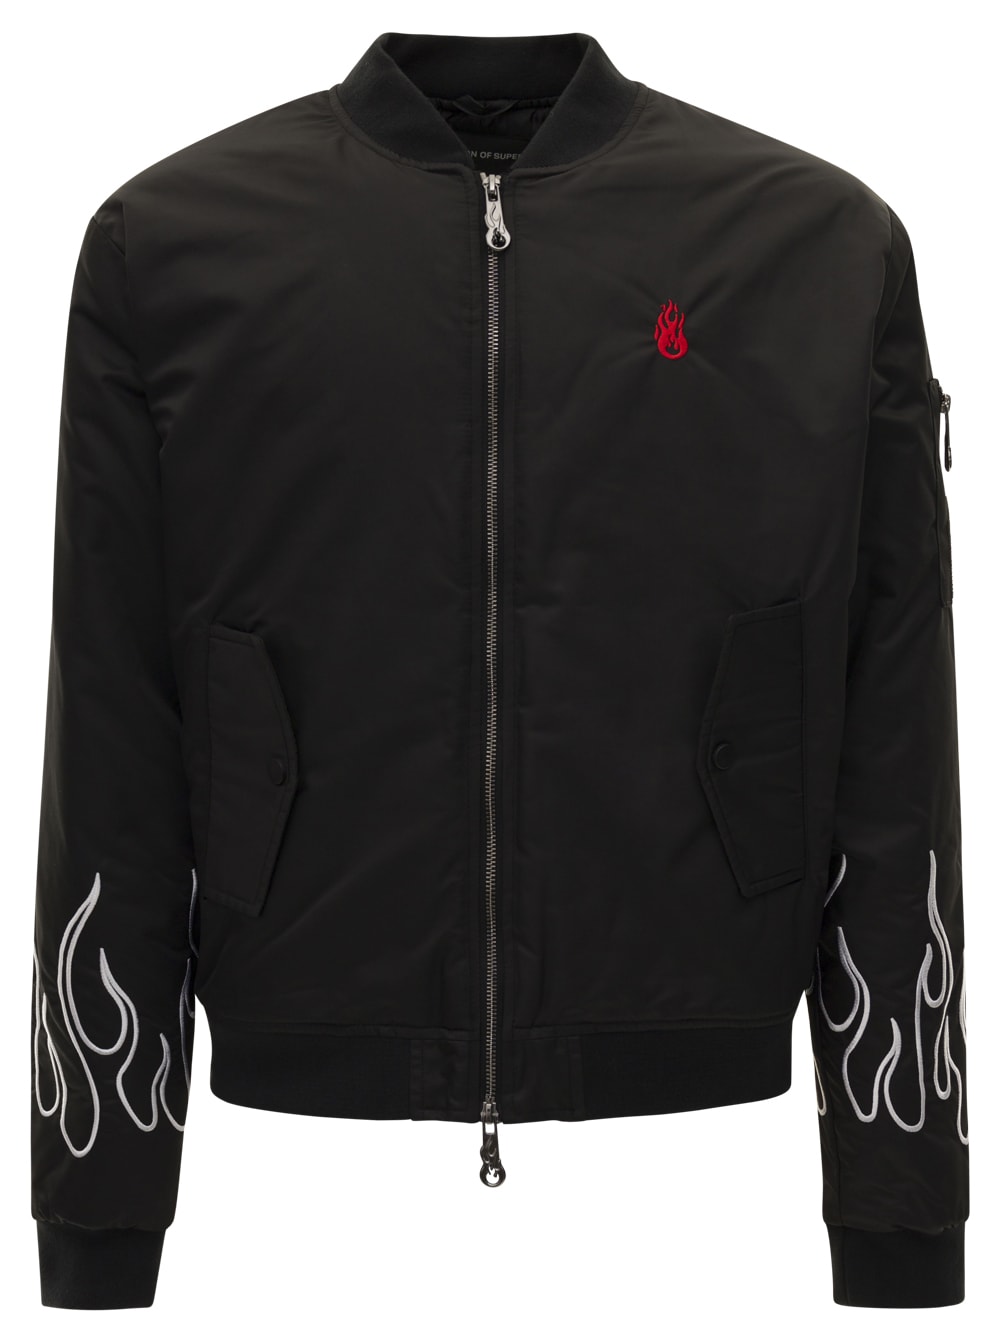 Black Bomber With White Flames Embroidery Man Vision Of Super